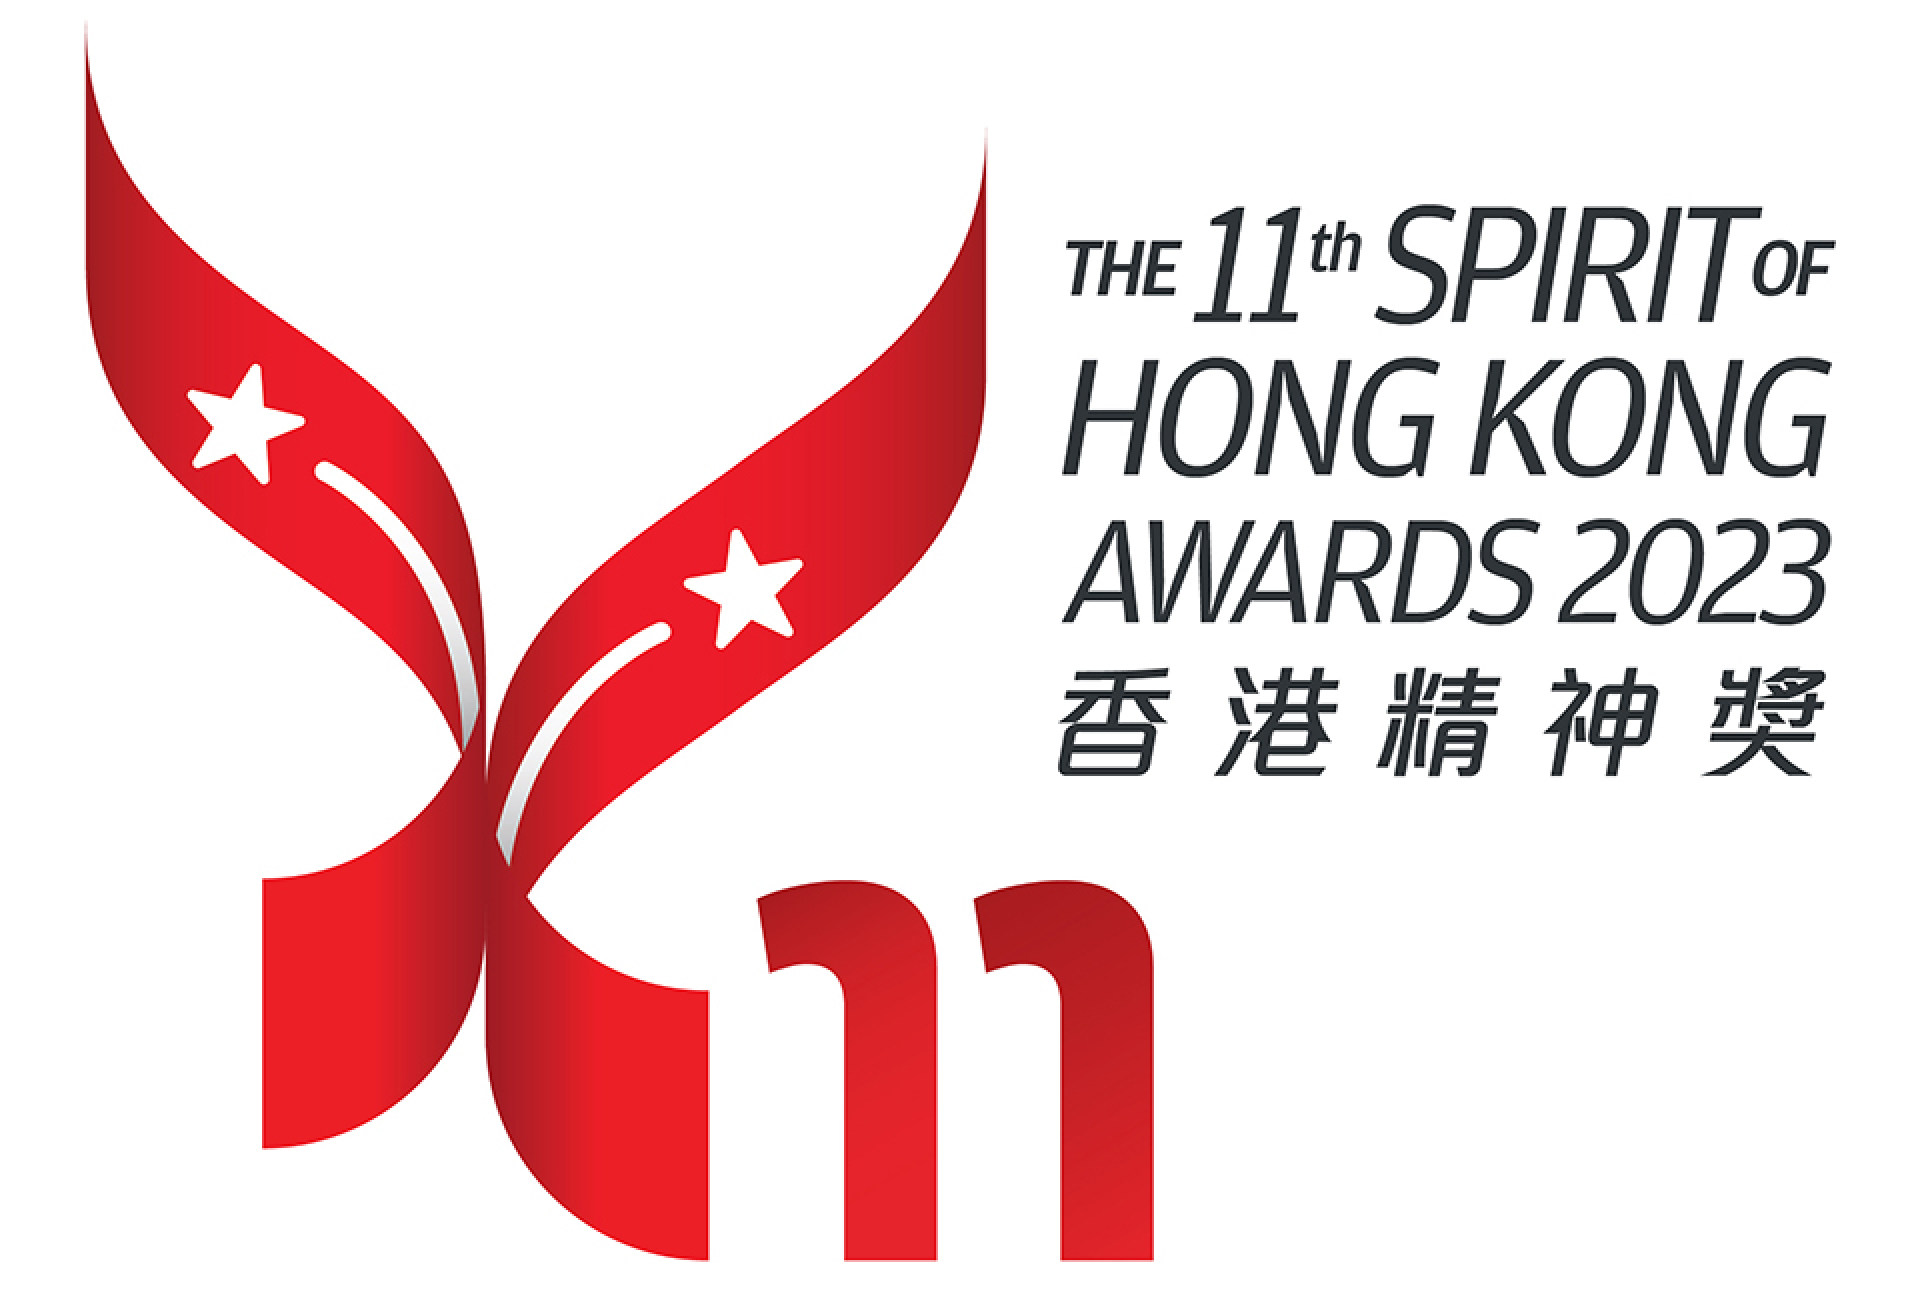 The results of the Spirit of Hong Kong Awards will be announced in December 2023. Photo: SCMP